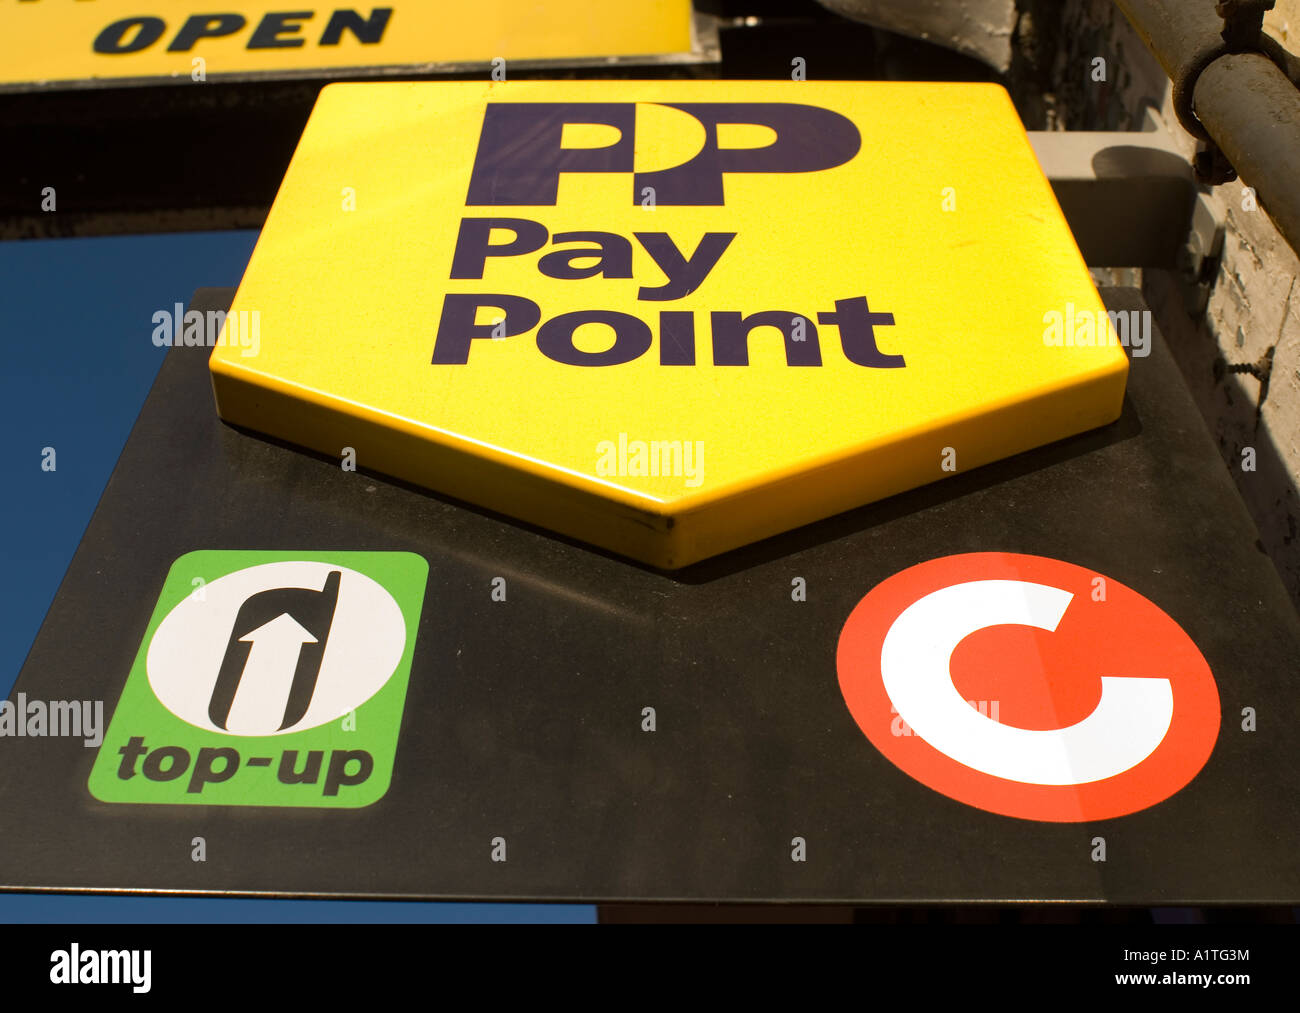 Pay point shop sign London England Stock Photo